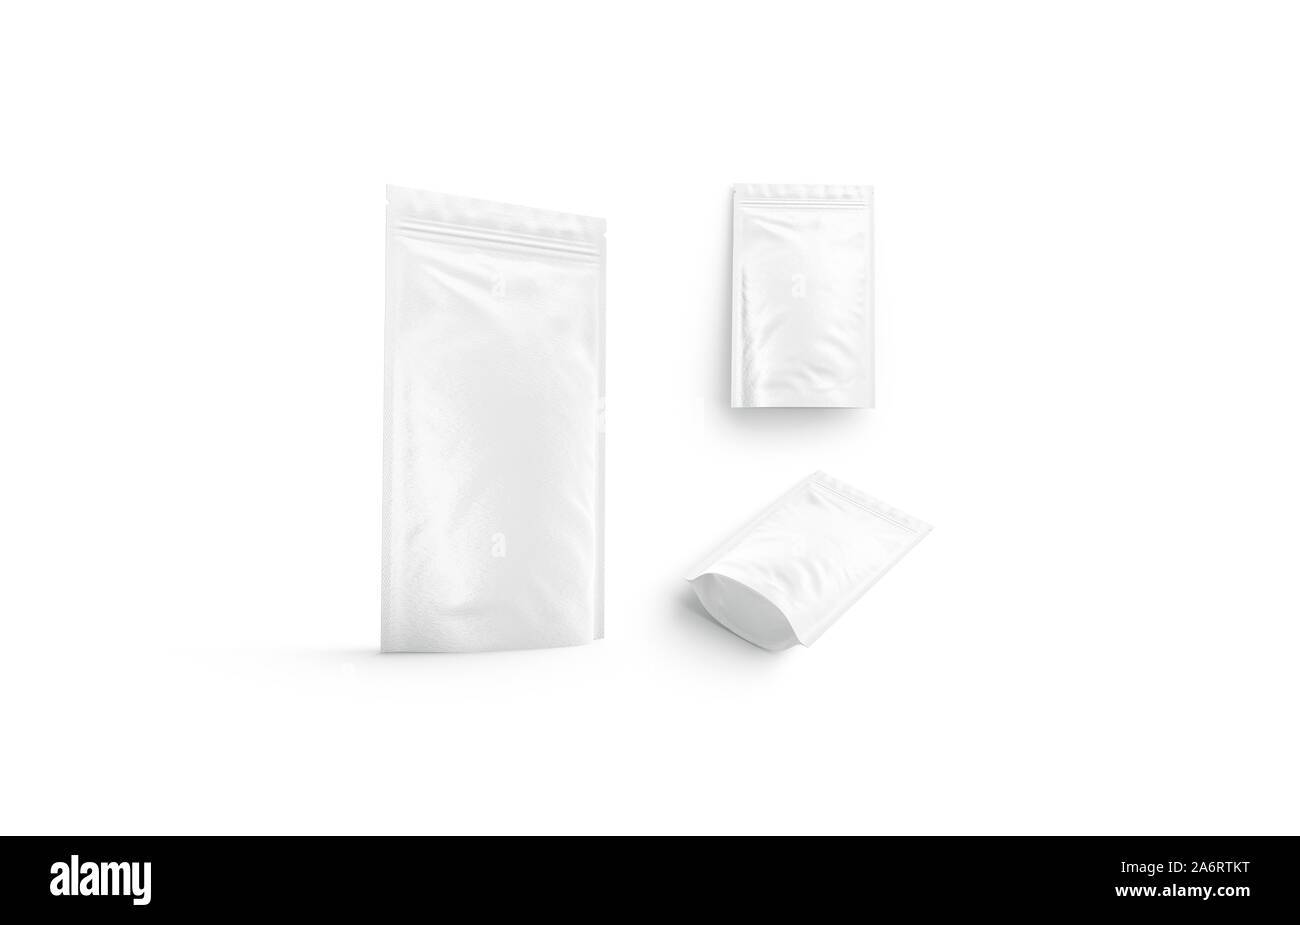 Blank white doypack mock up isolated, different view Stock Photo